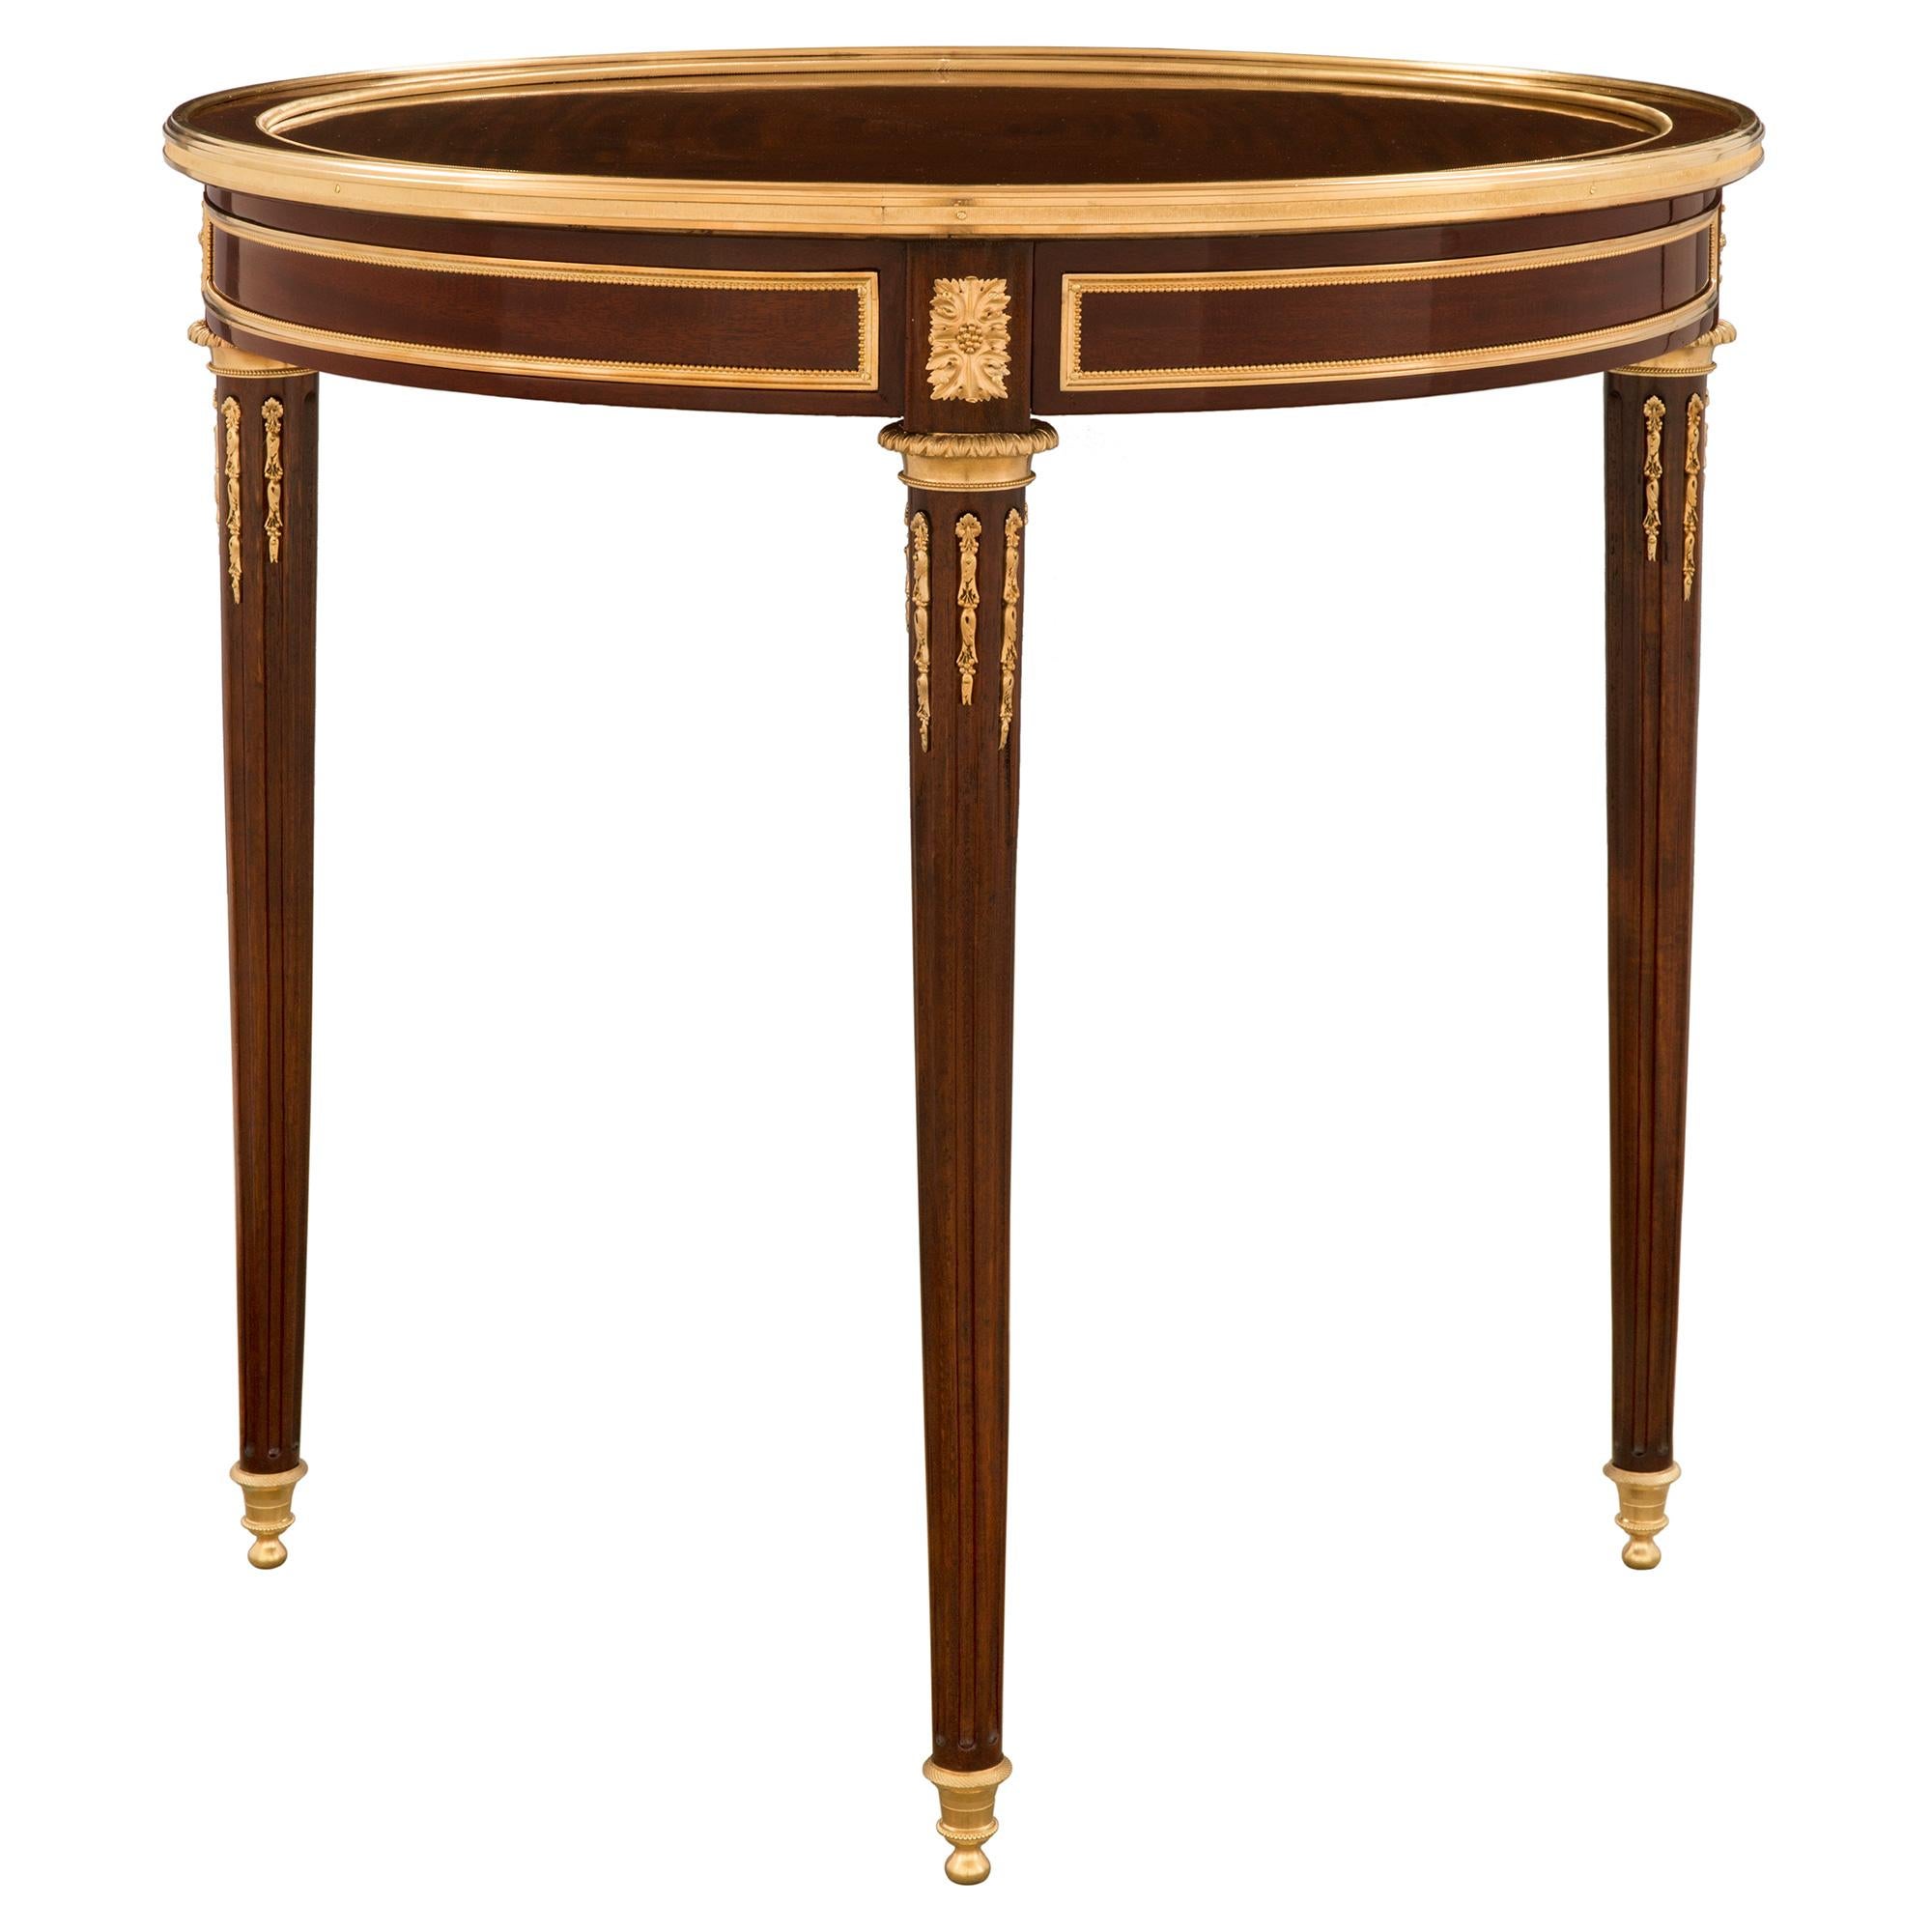 French 19th Century Louis XVI Style Mahogany Side Table, Attributed to Dasson In Good Condition For Sale In West Palm Beach, FL